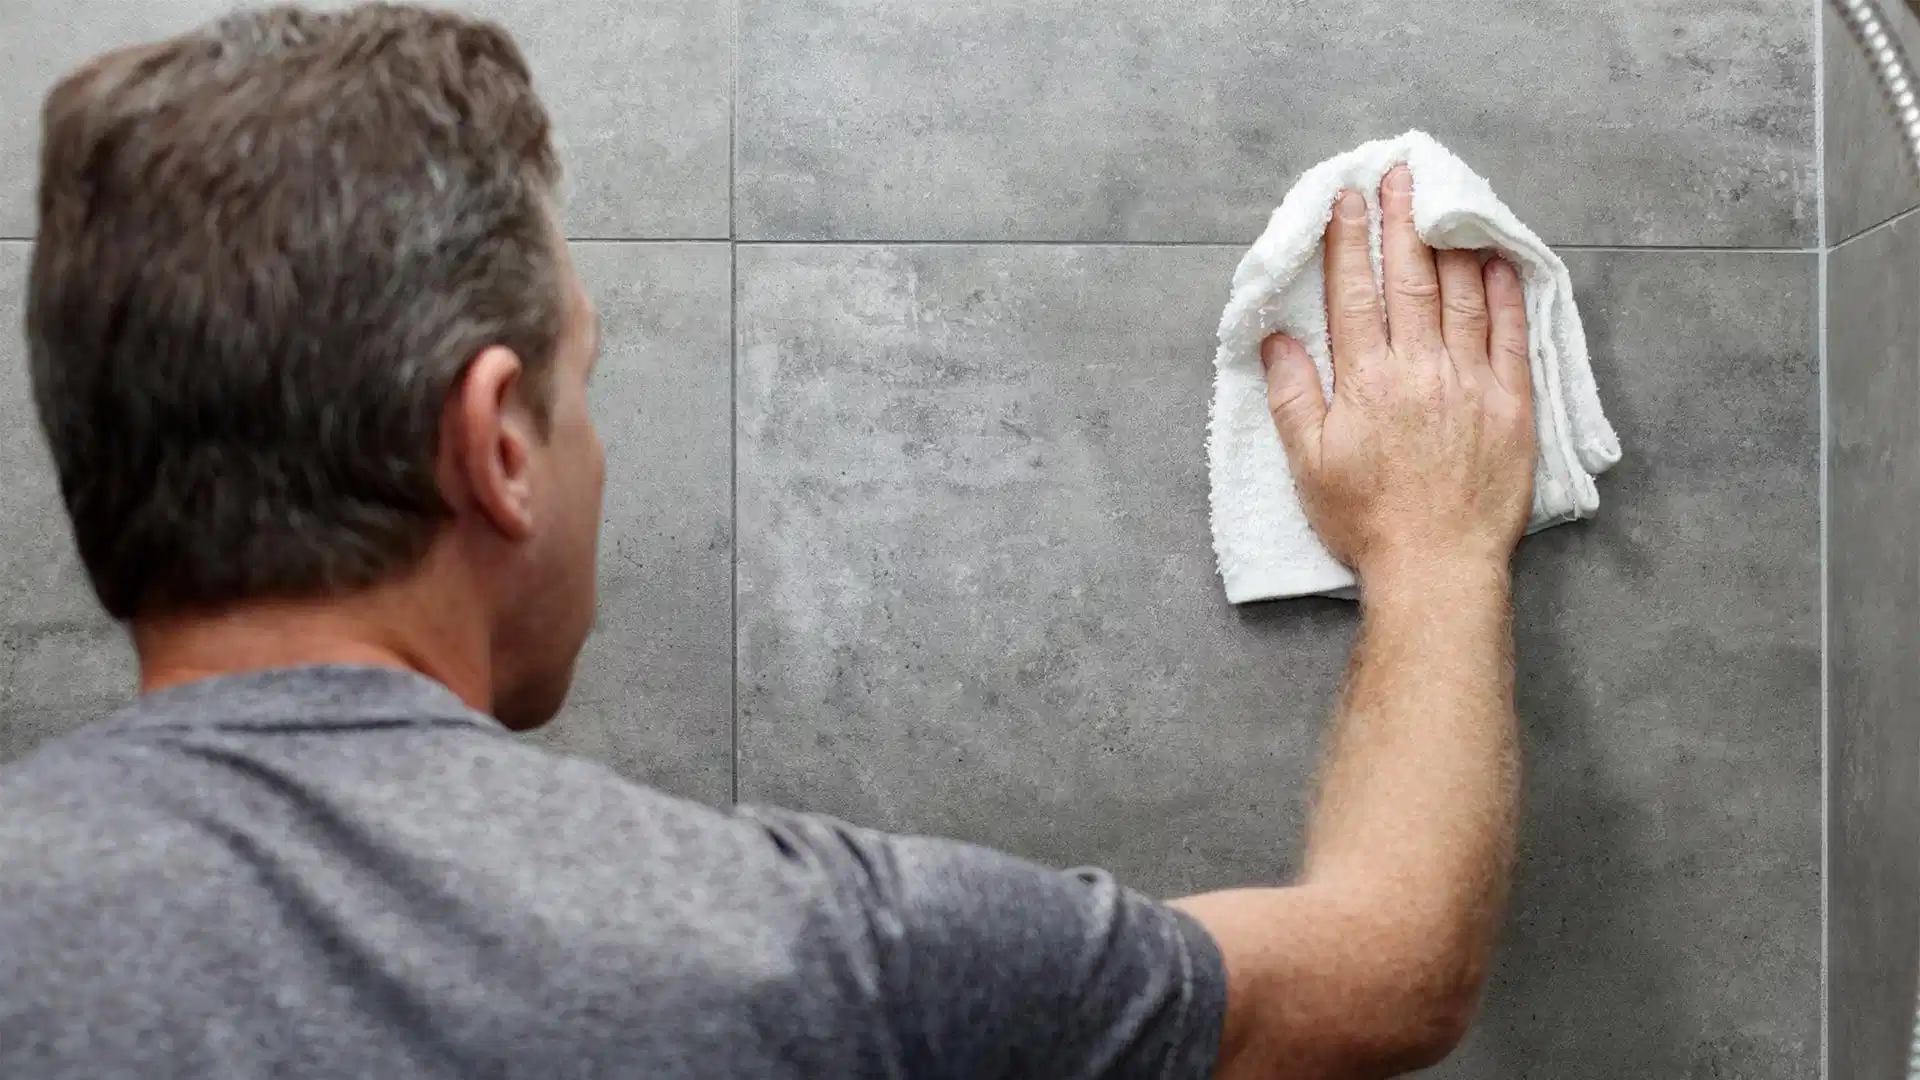 Man scrubs grout lines on grey tiled wall with a white towel